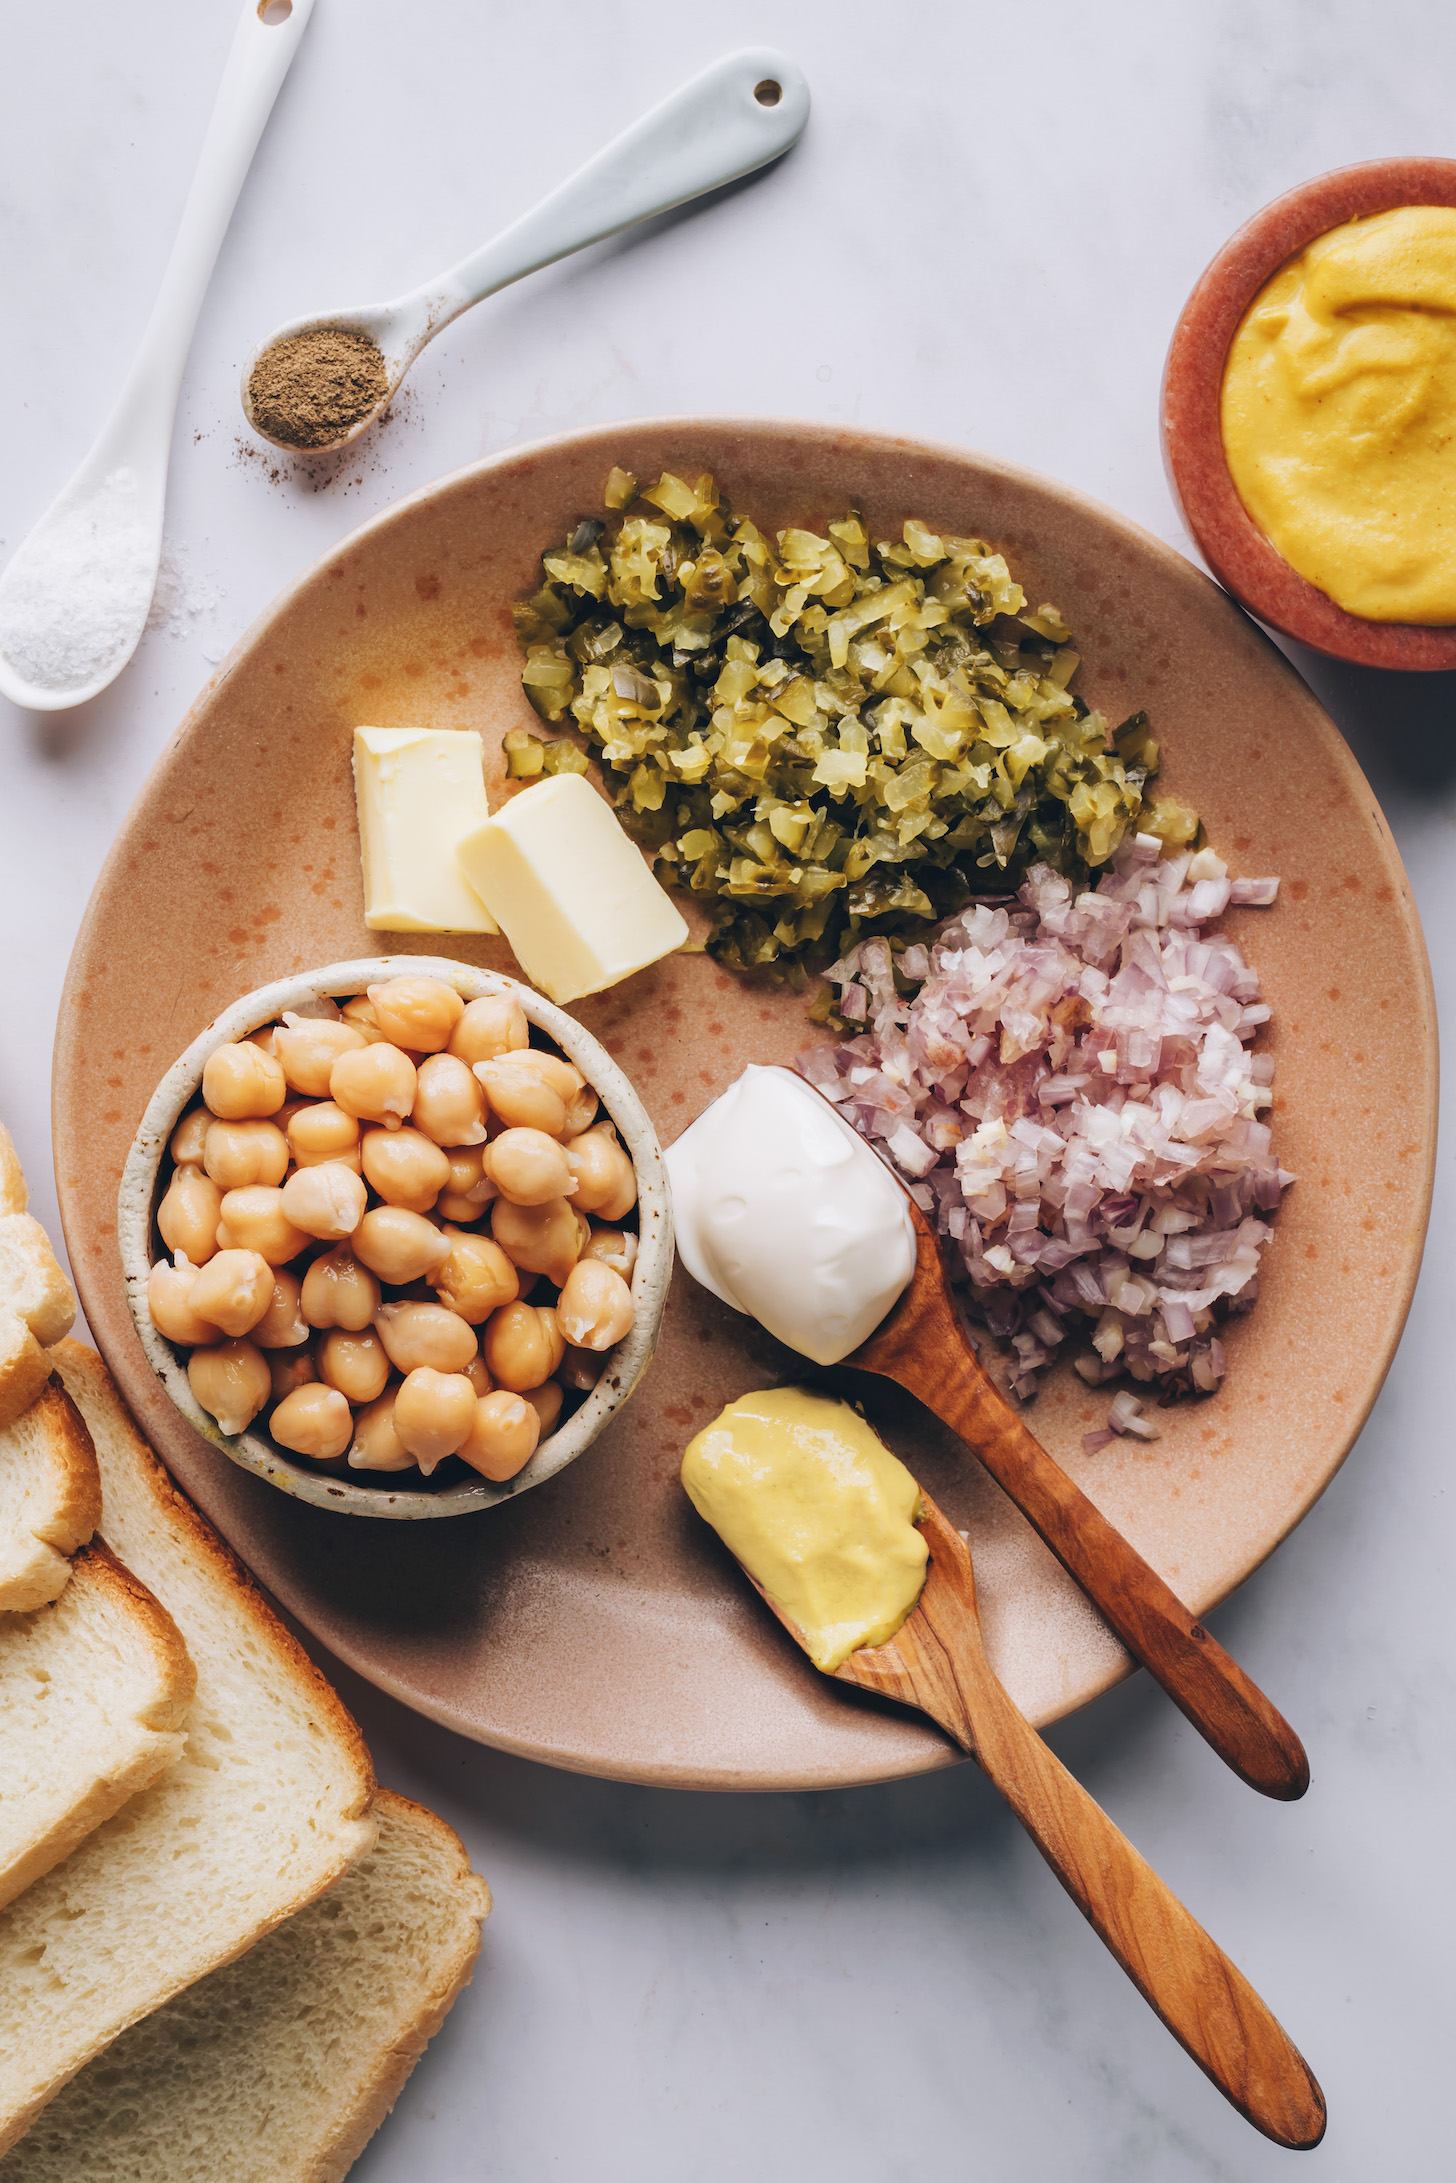 Slices of bread and vegan cheese next to spoons of salt and pepper and a plate with chickpeas, vegan butter, dill pickles, shallot, vegan mayo, and mustard